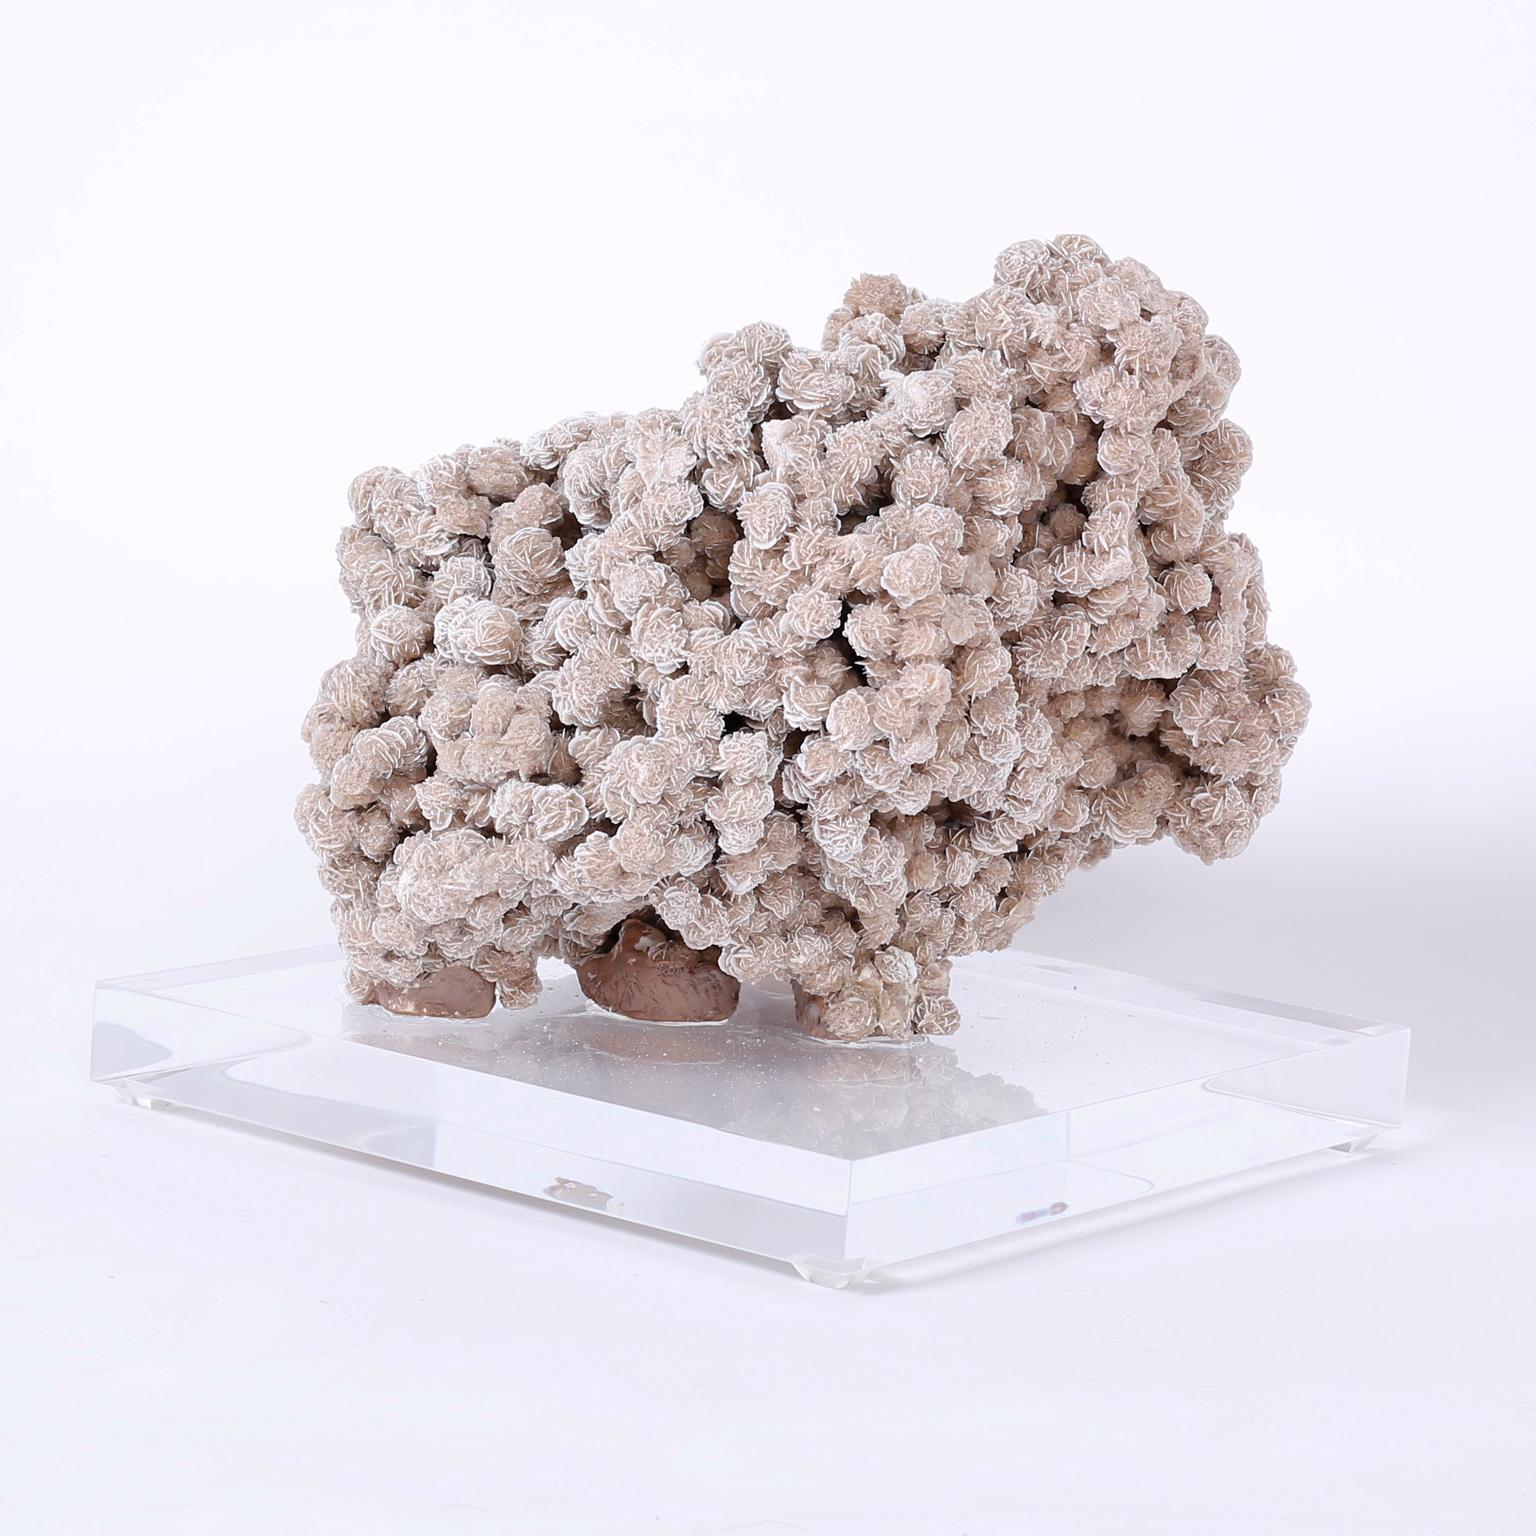 Nicknamed the desert rose, this type of Gypsum aggregate cluster is a geological rarity that is formed during water evacuation. This organic object is presented on a custom lucite Stand to enhance its sculptural elements.